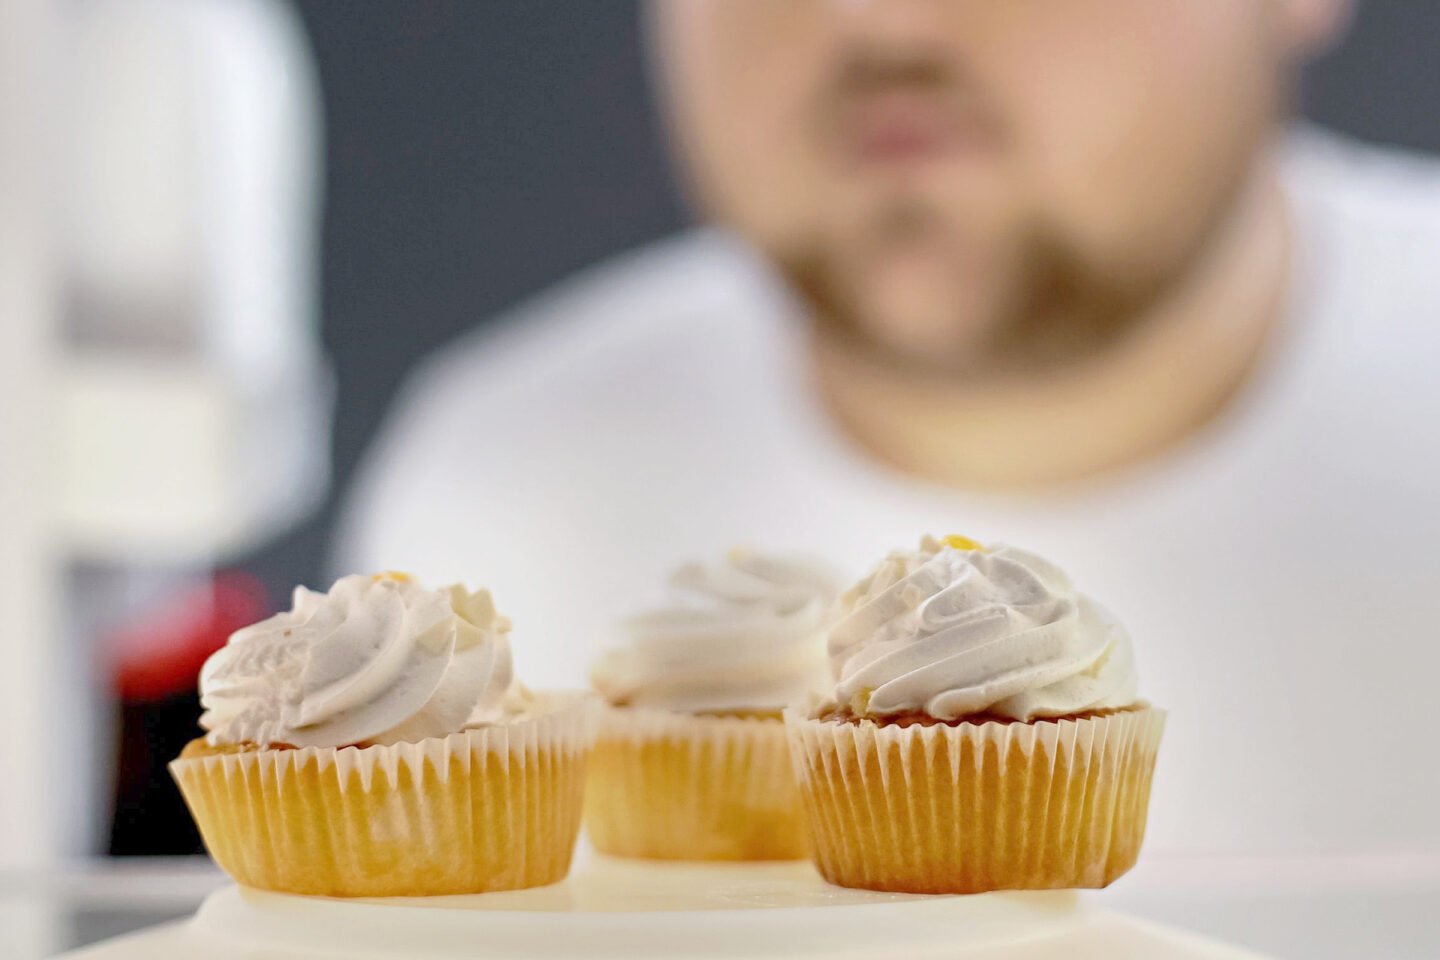 man looks at cupcakes in the fridge